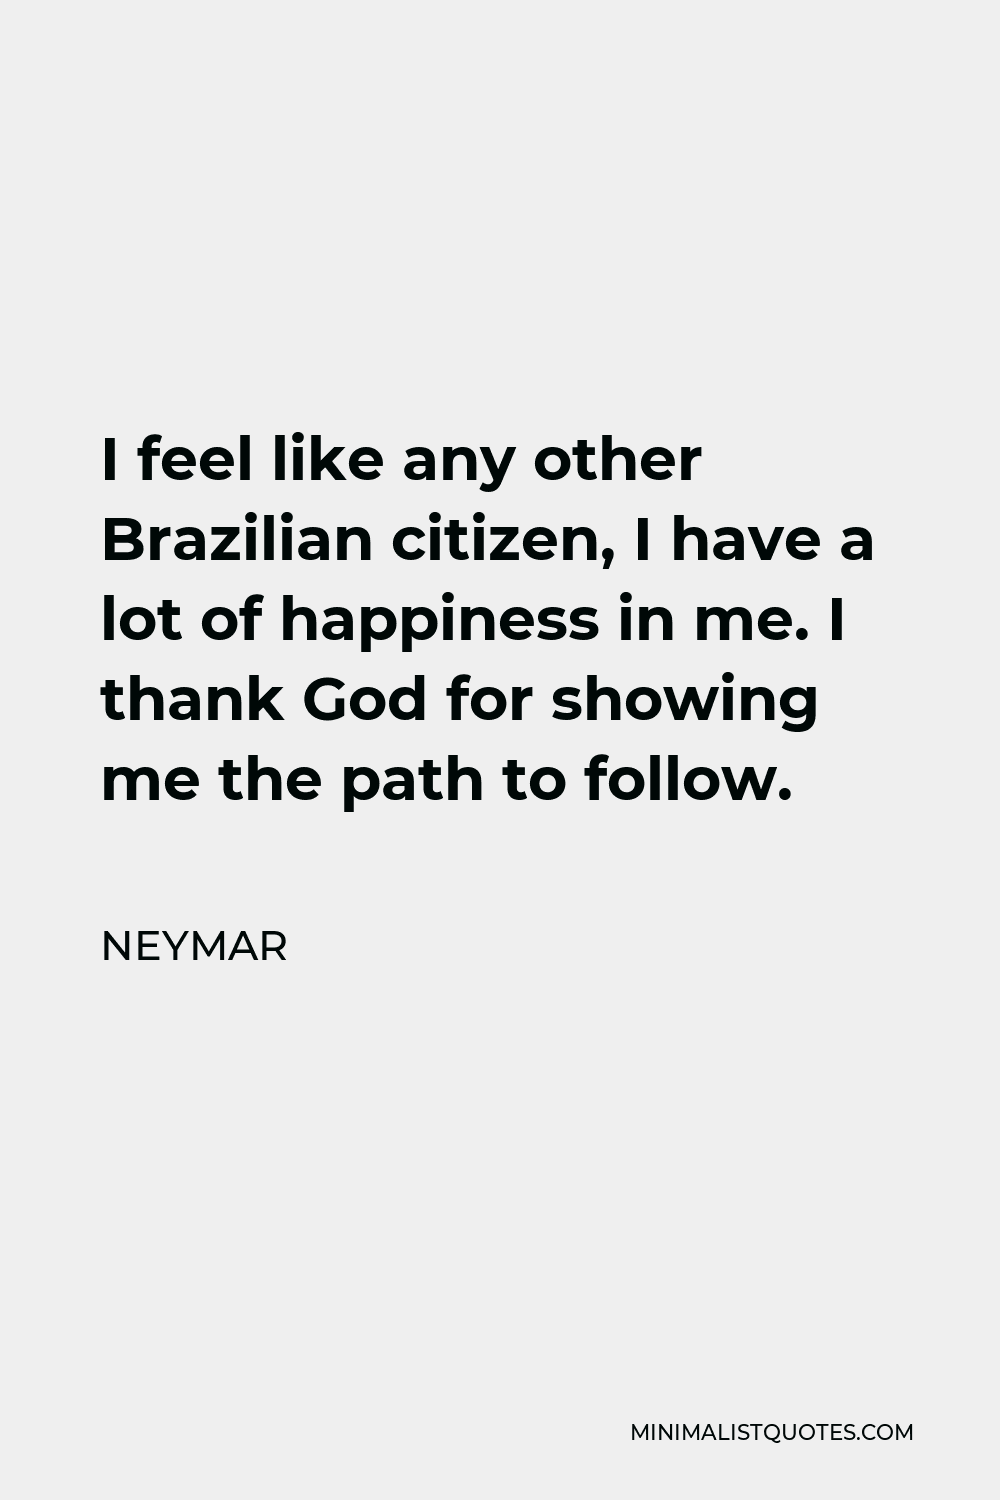 Neymar Quote - I feel like any other Brazilian citizen, I have a lot of happiness in me. I thank God for showing me the path to follow.